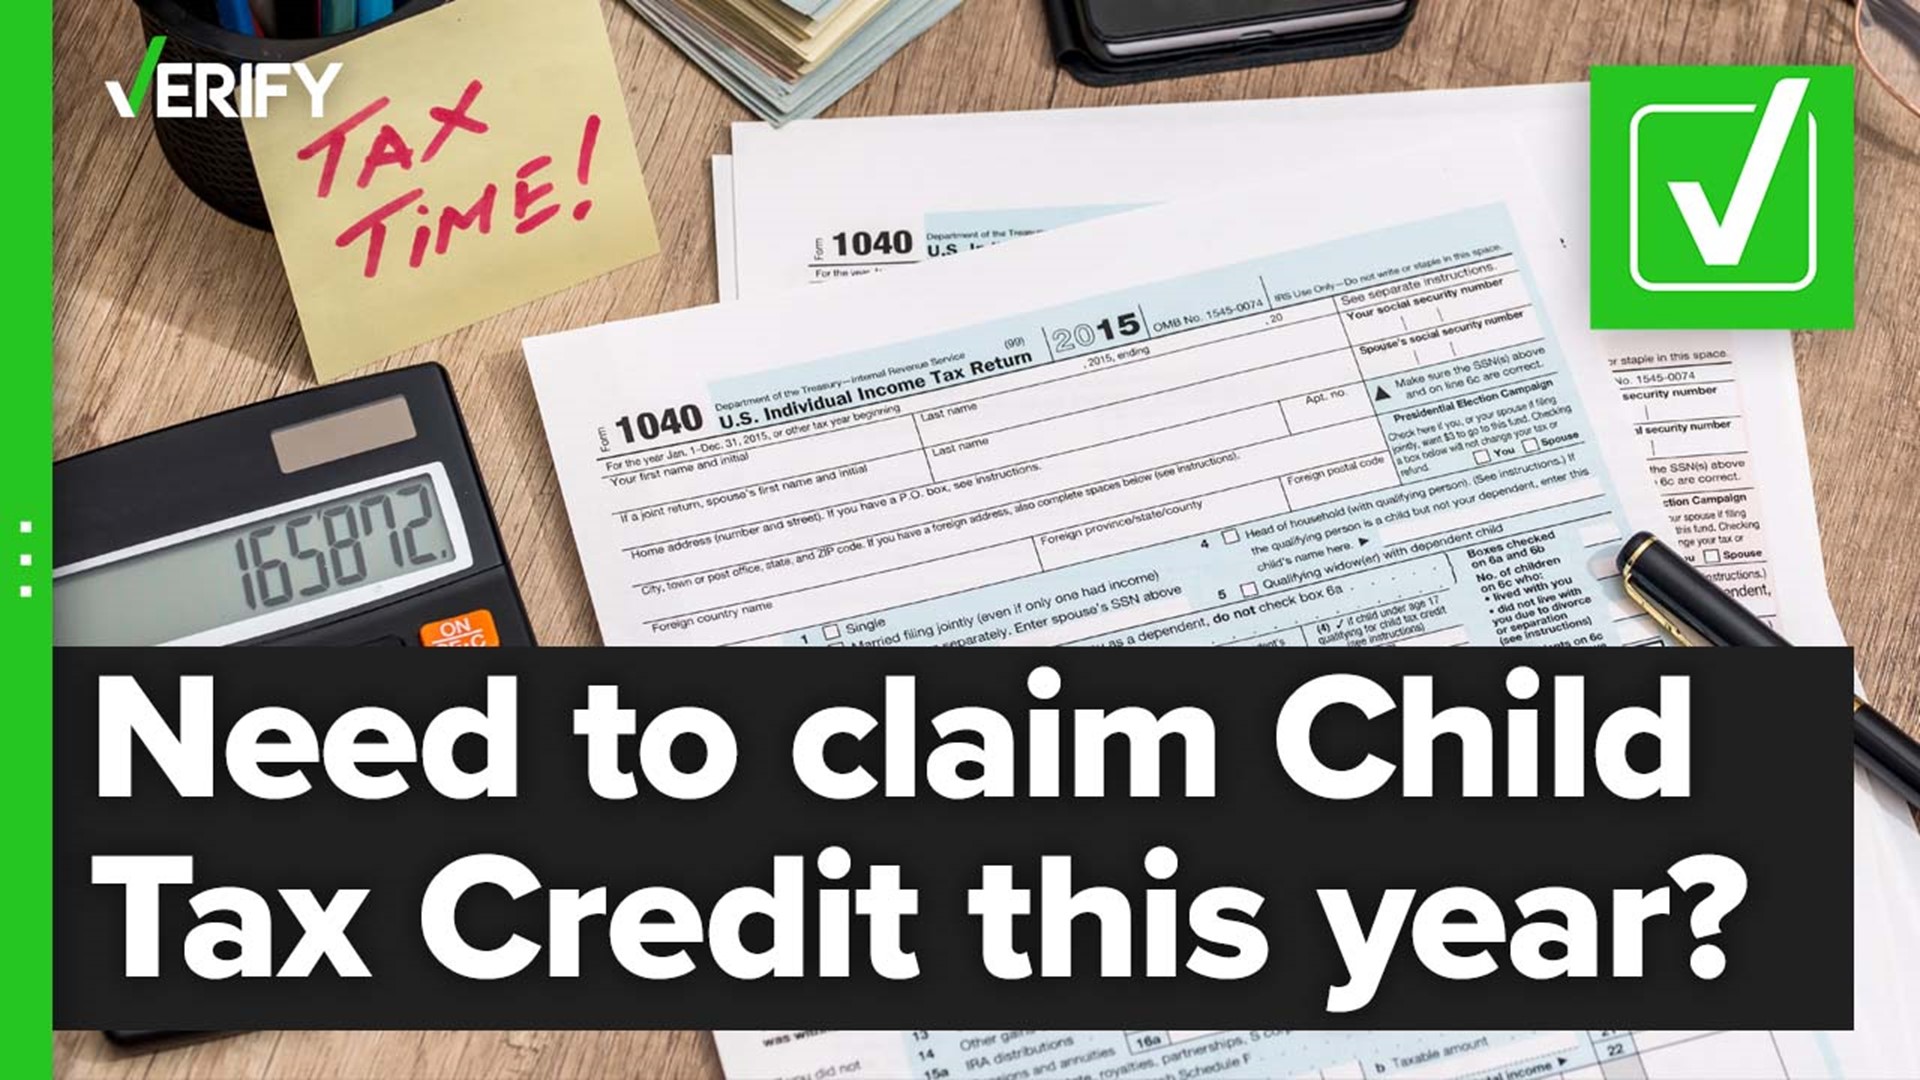 You may have gotten monthly checks already, but you’re likely still owed more money. To get that, you need to claim your advance child tax credit payments.